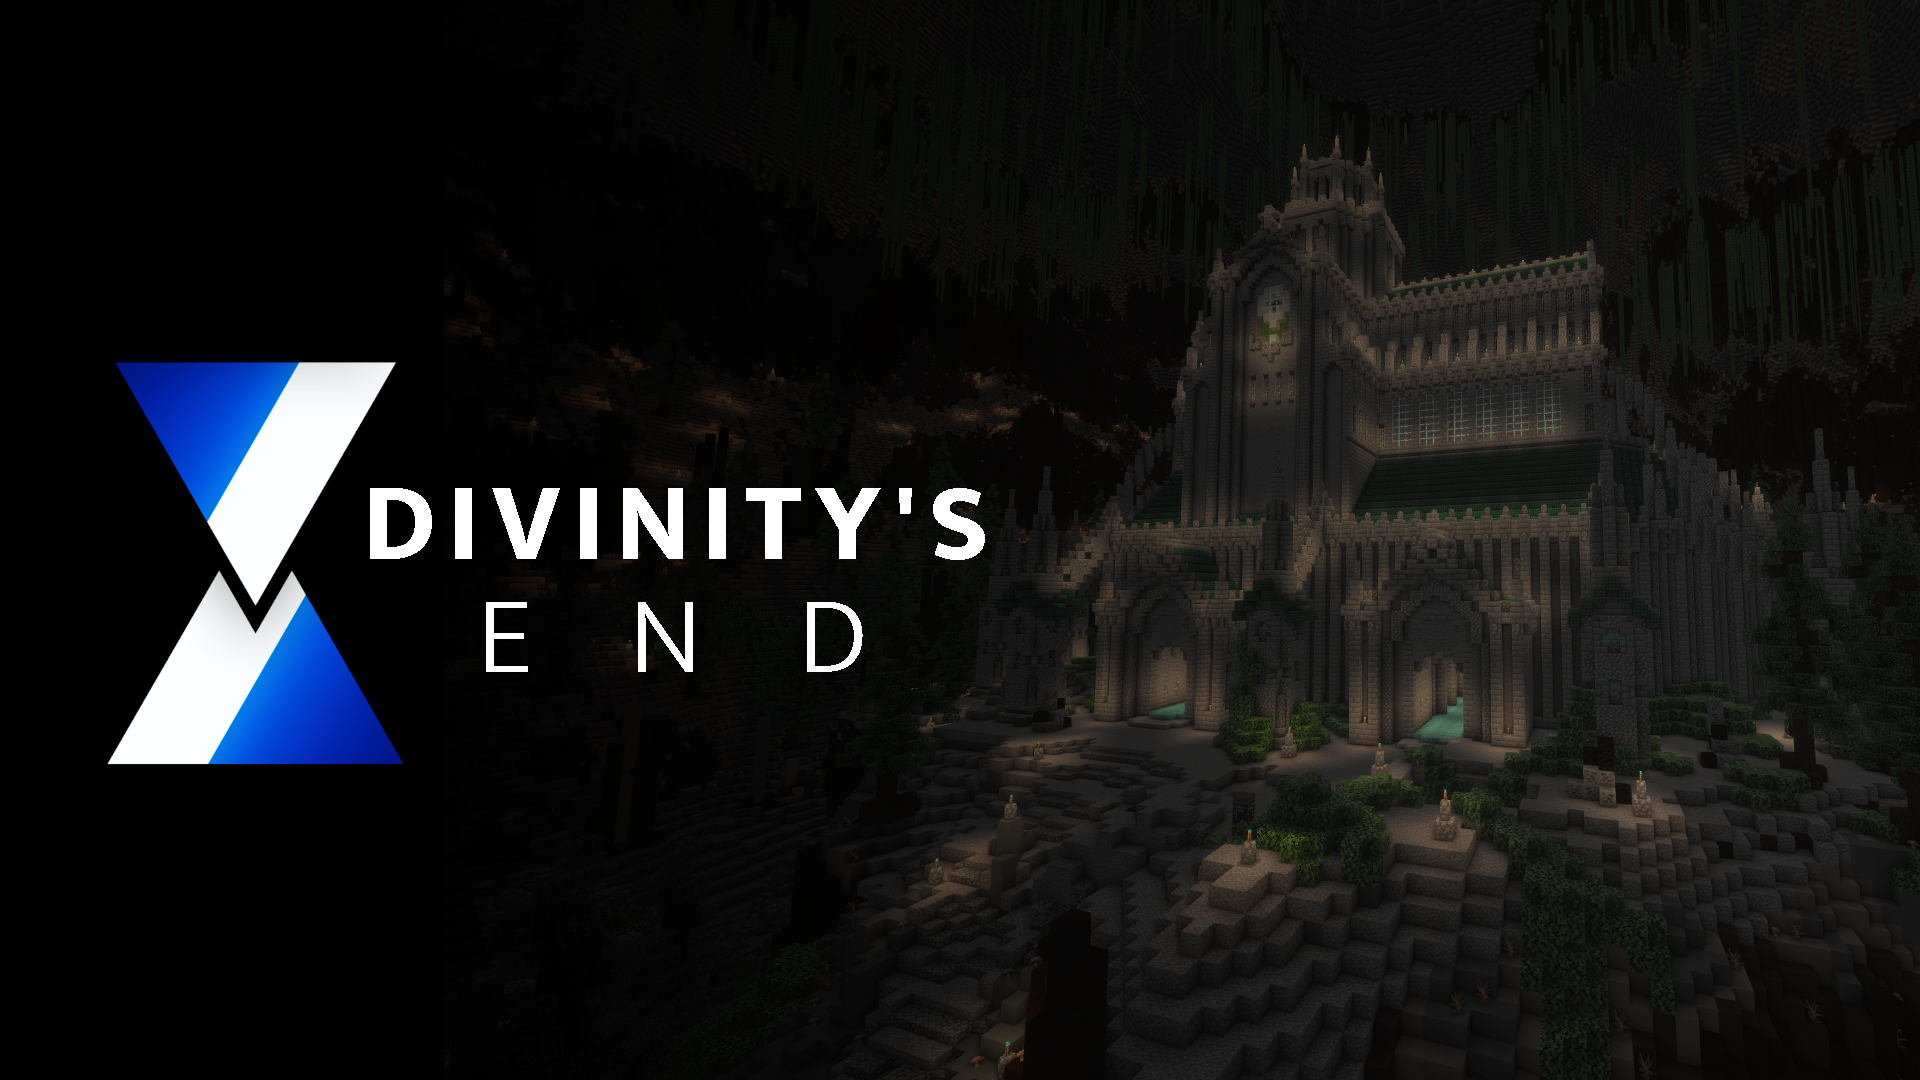 Divinity's End